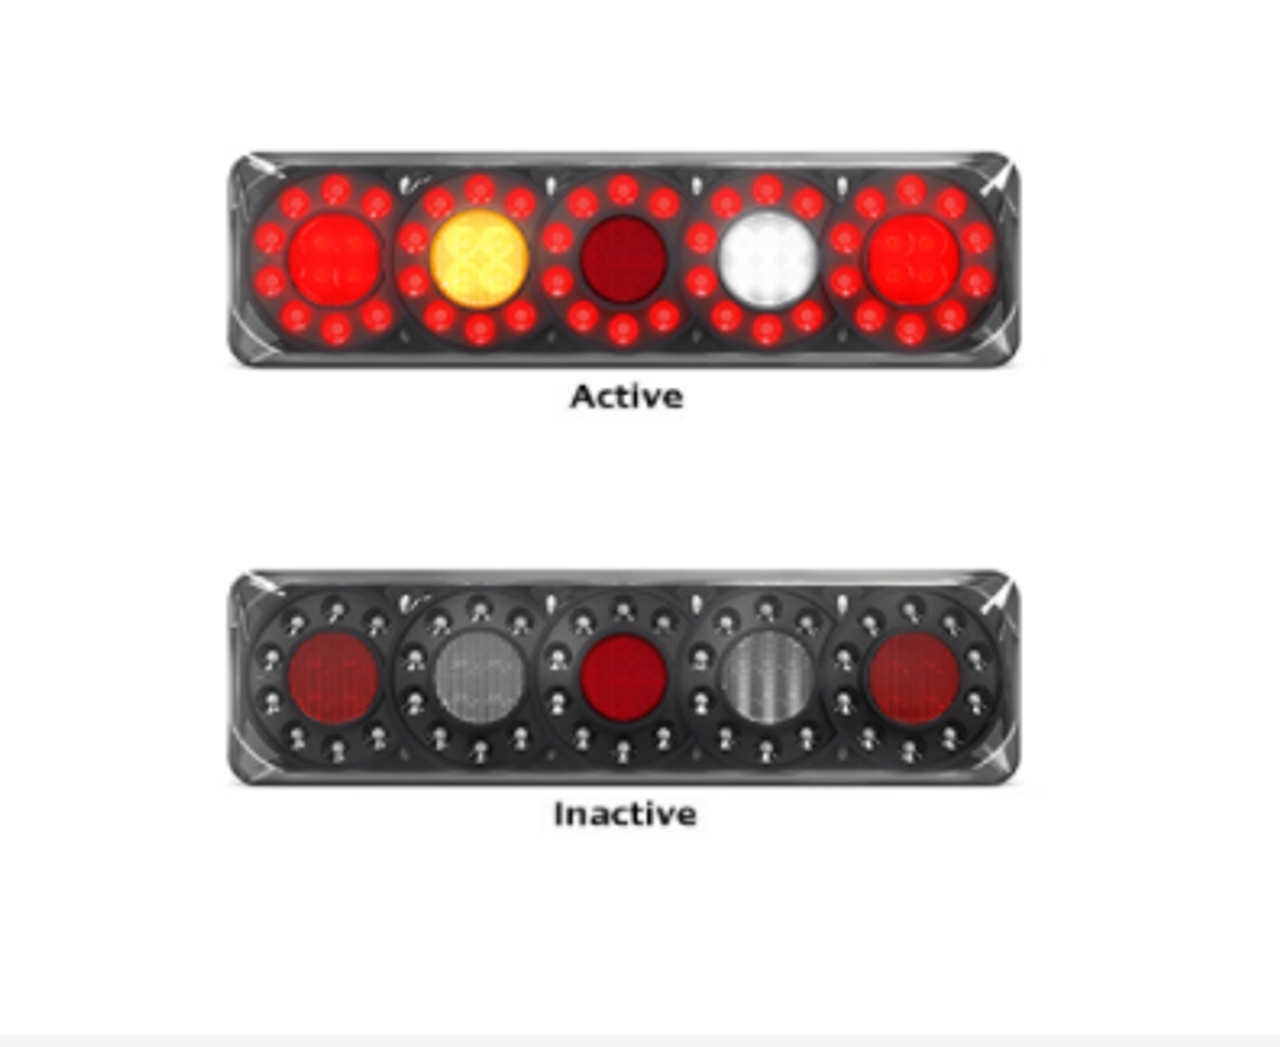 3851ARWM-2 - Combination Tail Light. Medium Tray & Truck Series Light. Diffused Tail Function. Top Row Indicator. Clear Lens. Stop, Tail, Indicator and Reverse Lights. Twin Pack. Multi-Volt 12v & 24v. Autolamp.  Ultimate LED. 